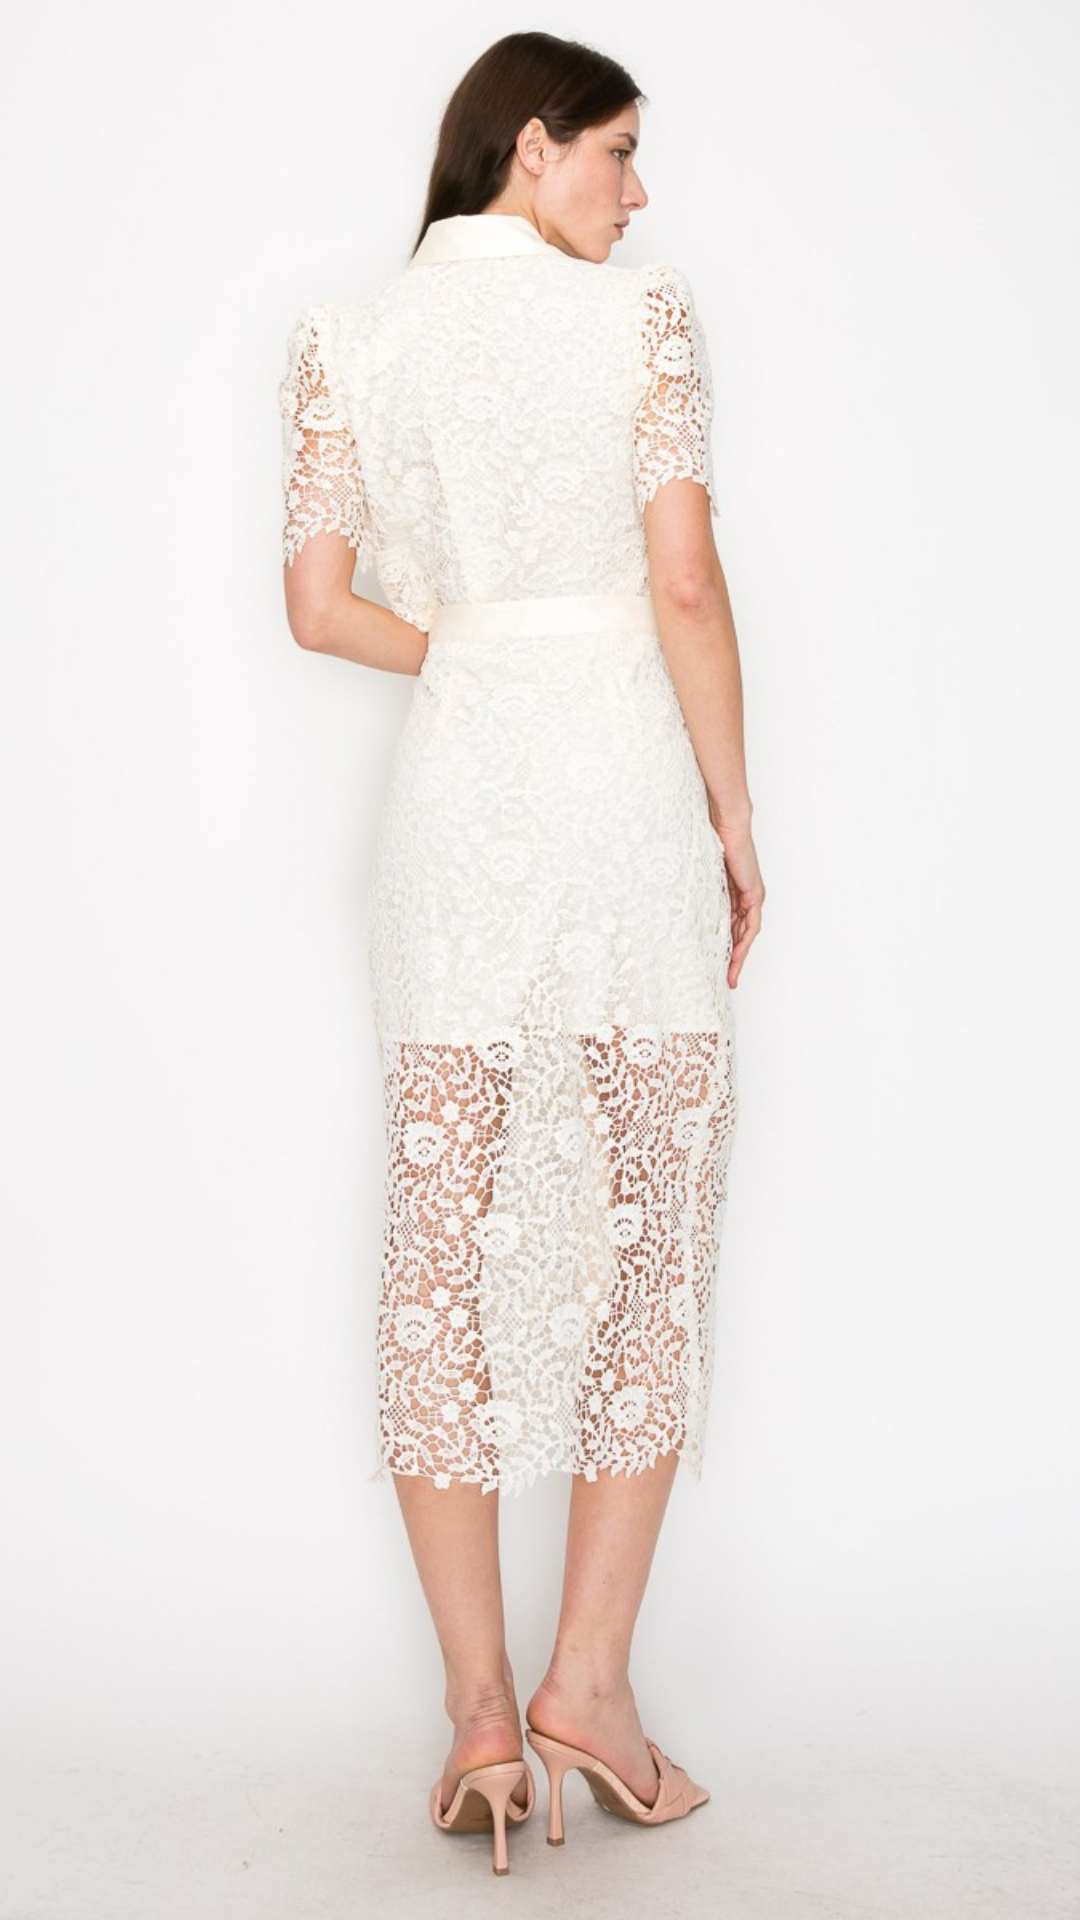 Refined Lace Skirt